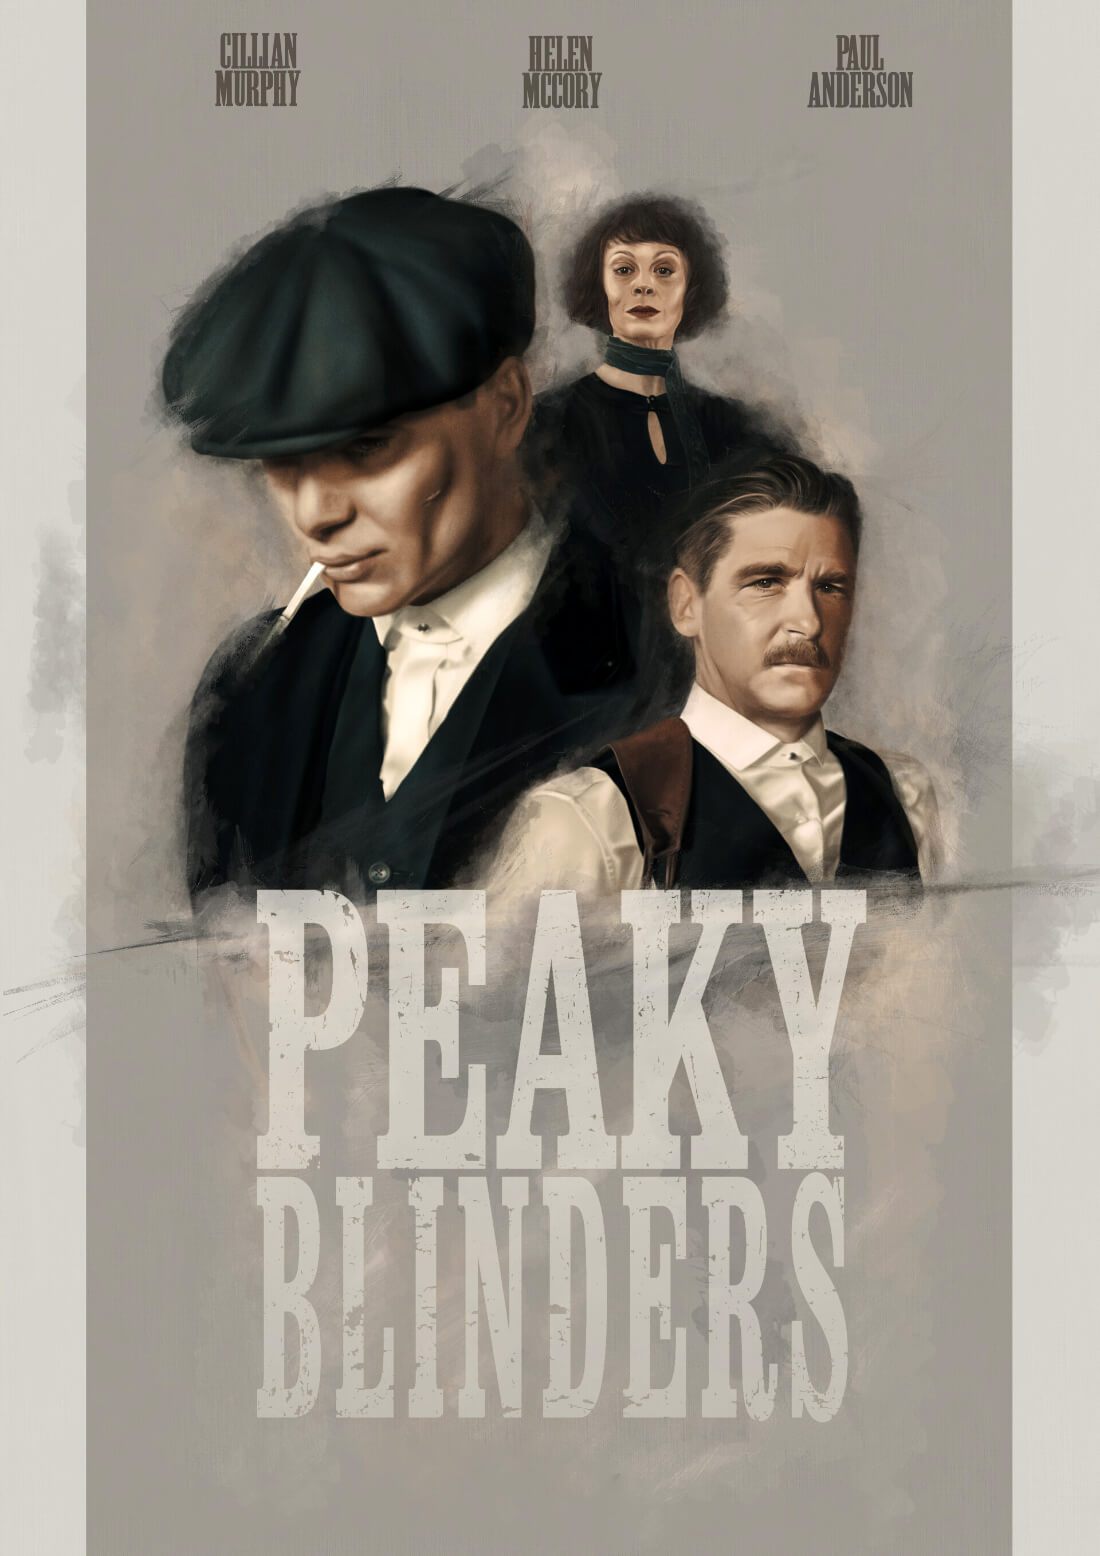 Peaky Blinders - Netflix TV Show - Illustrated Poster - Posters by Vendy, Buy Posters, Frames, Canvas & Digital Art Prints